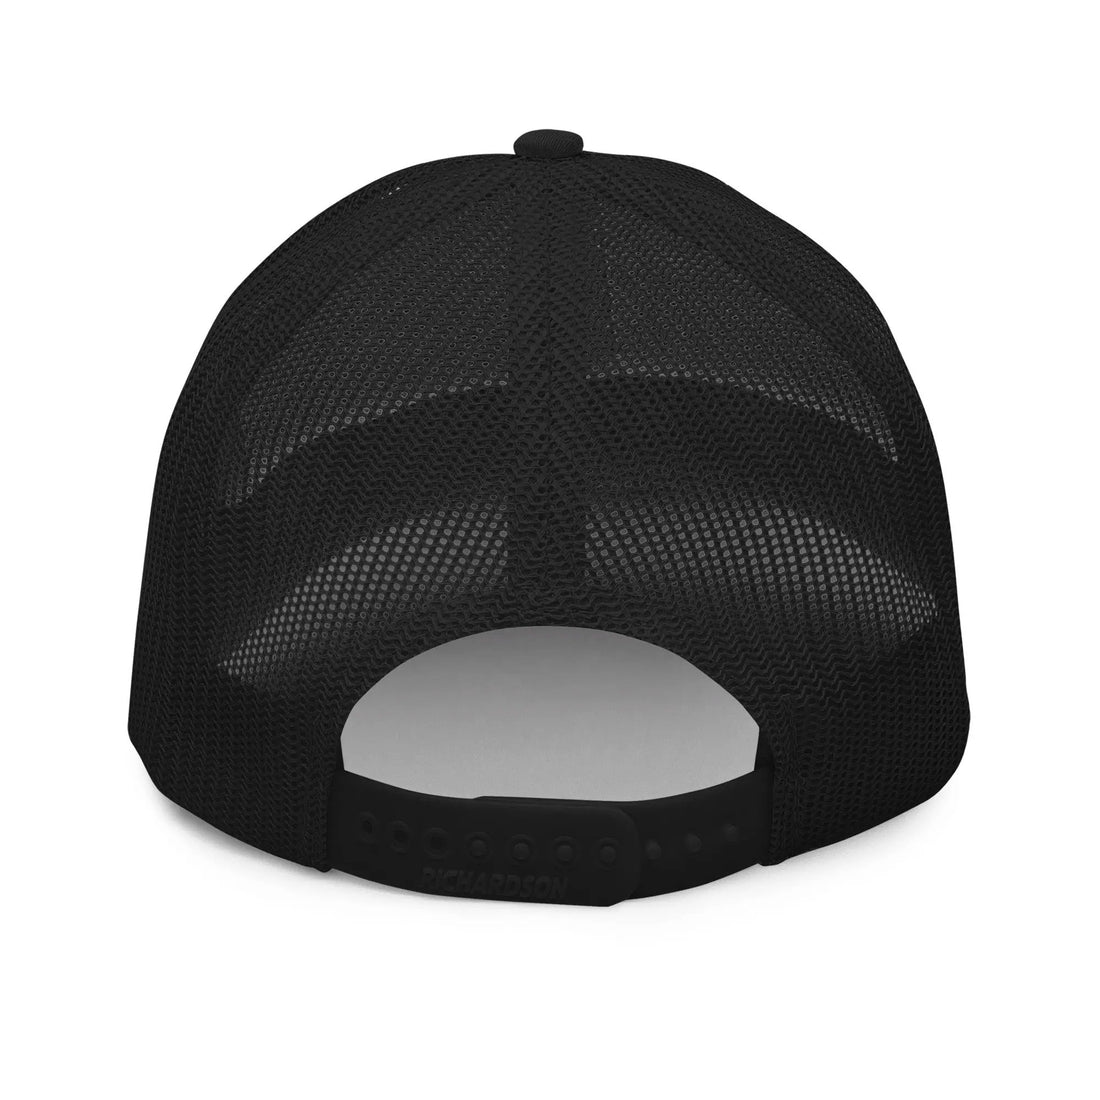 a black trucker hat with a white visor